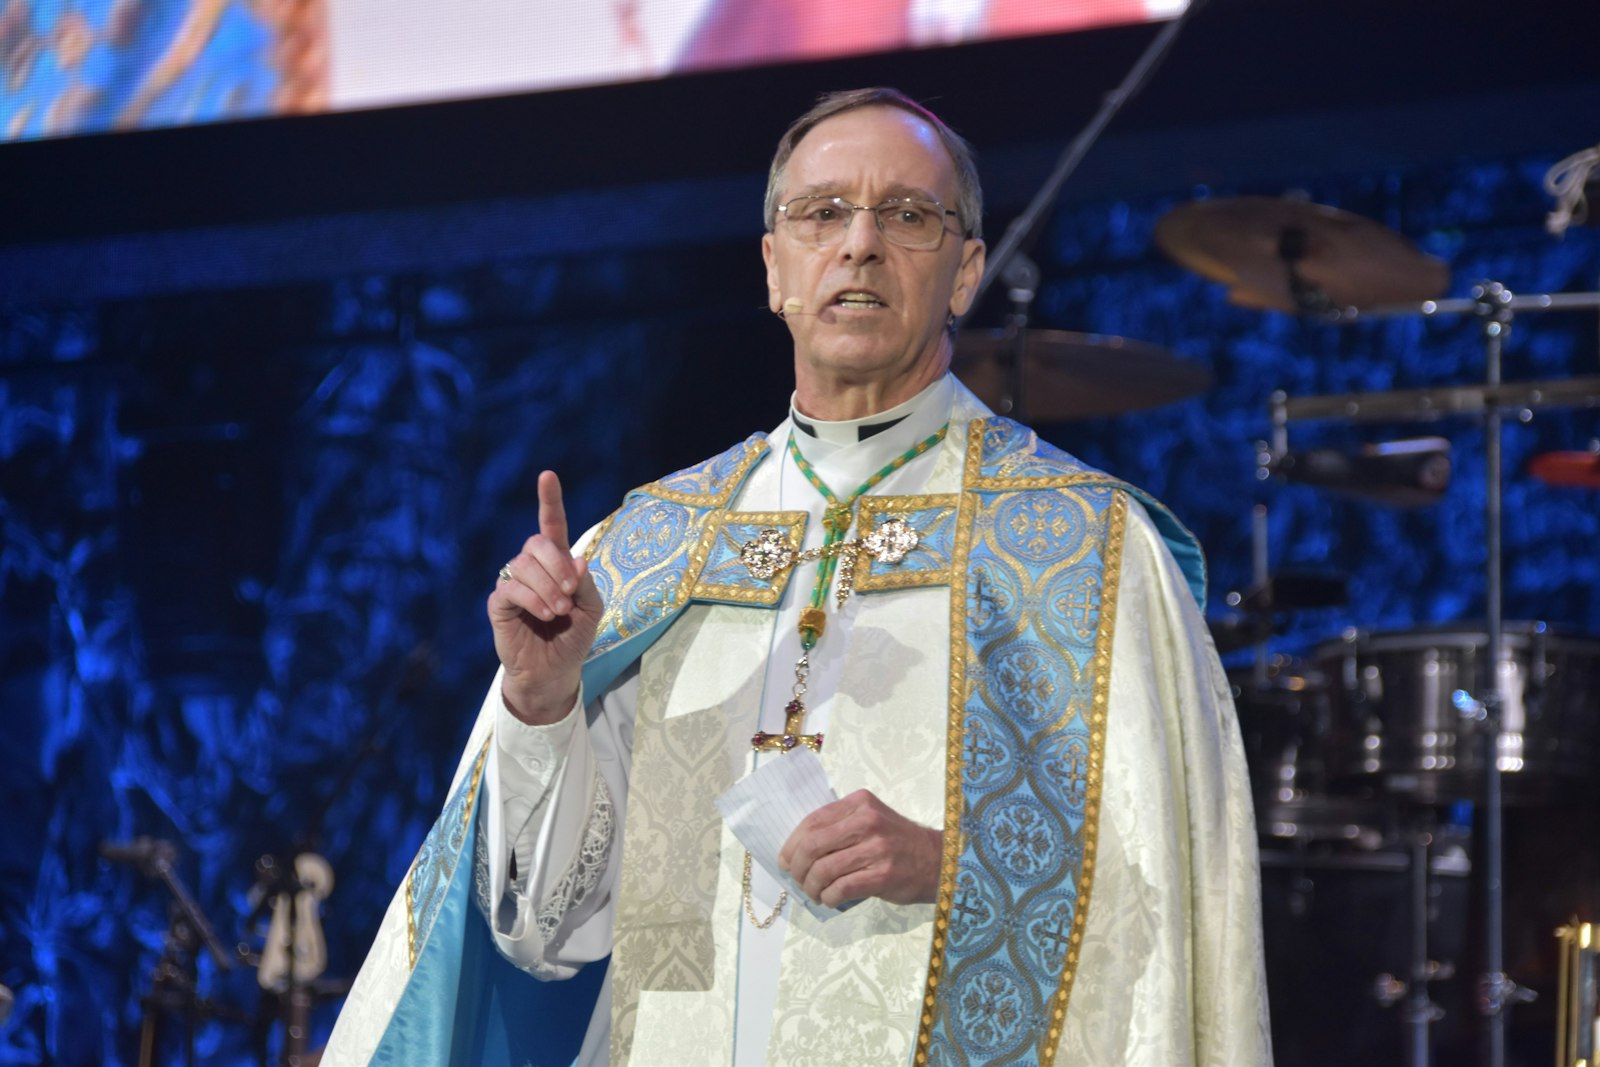 Indianapolis Archbishop Charles C. Thompson addresses more than 12,000 youths in Lucas Oil Stadium in Indianapolis during the opening session of the National Catholic Youth Conference on Nov. 16. (OSV News photo/Natalie Hoefer, The Criterion)